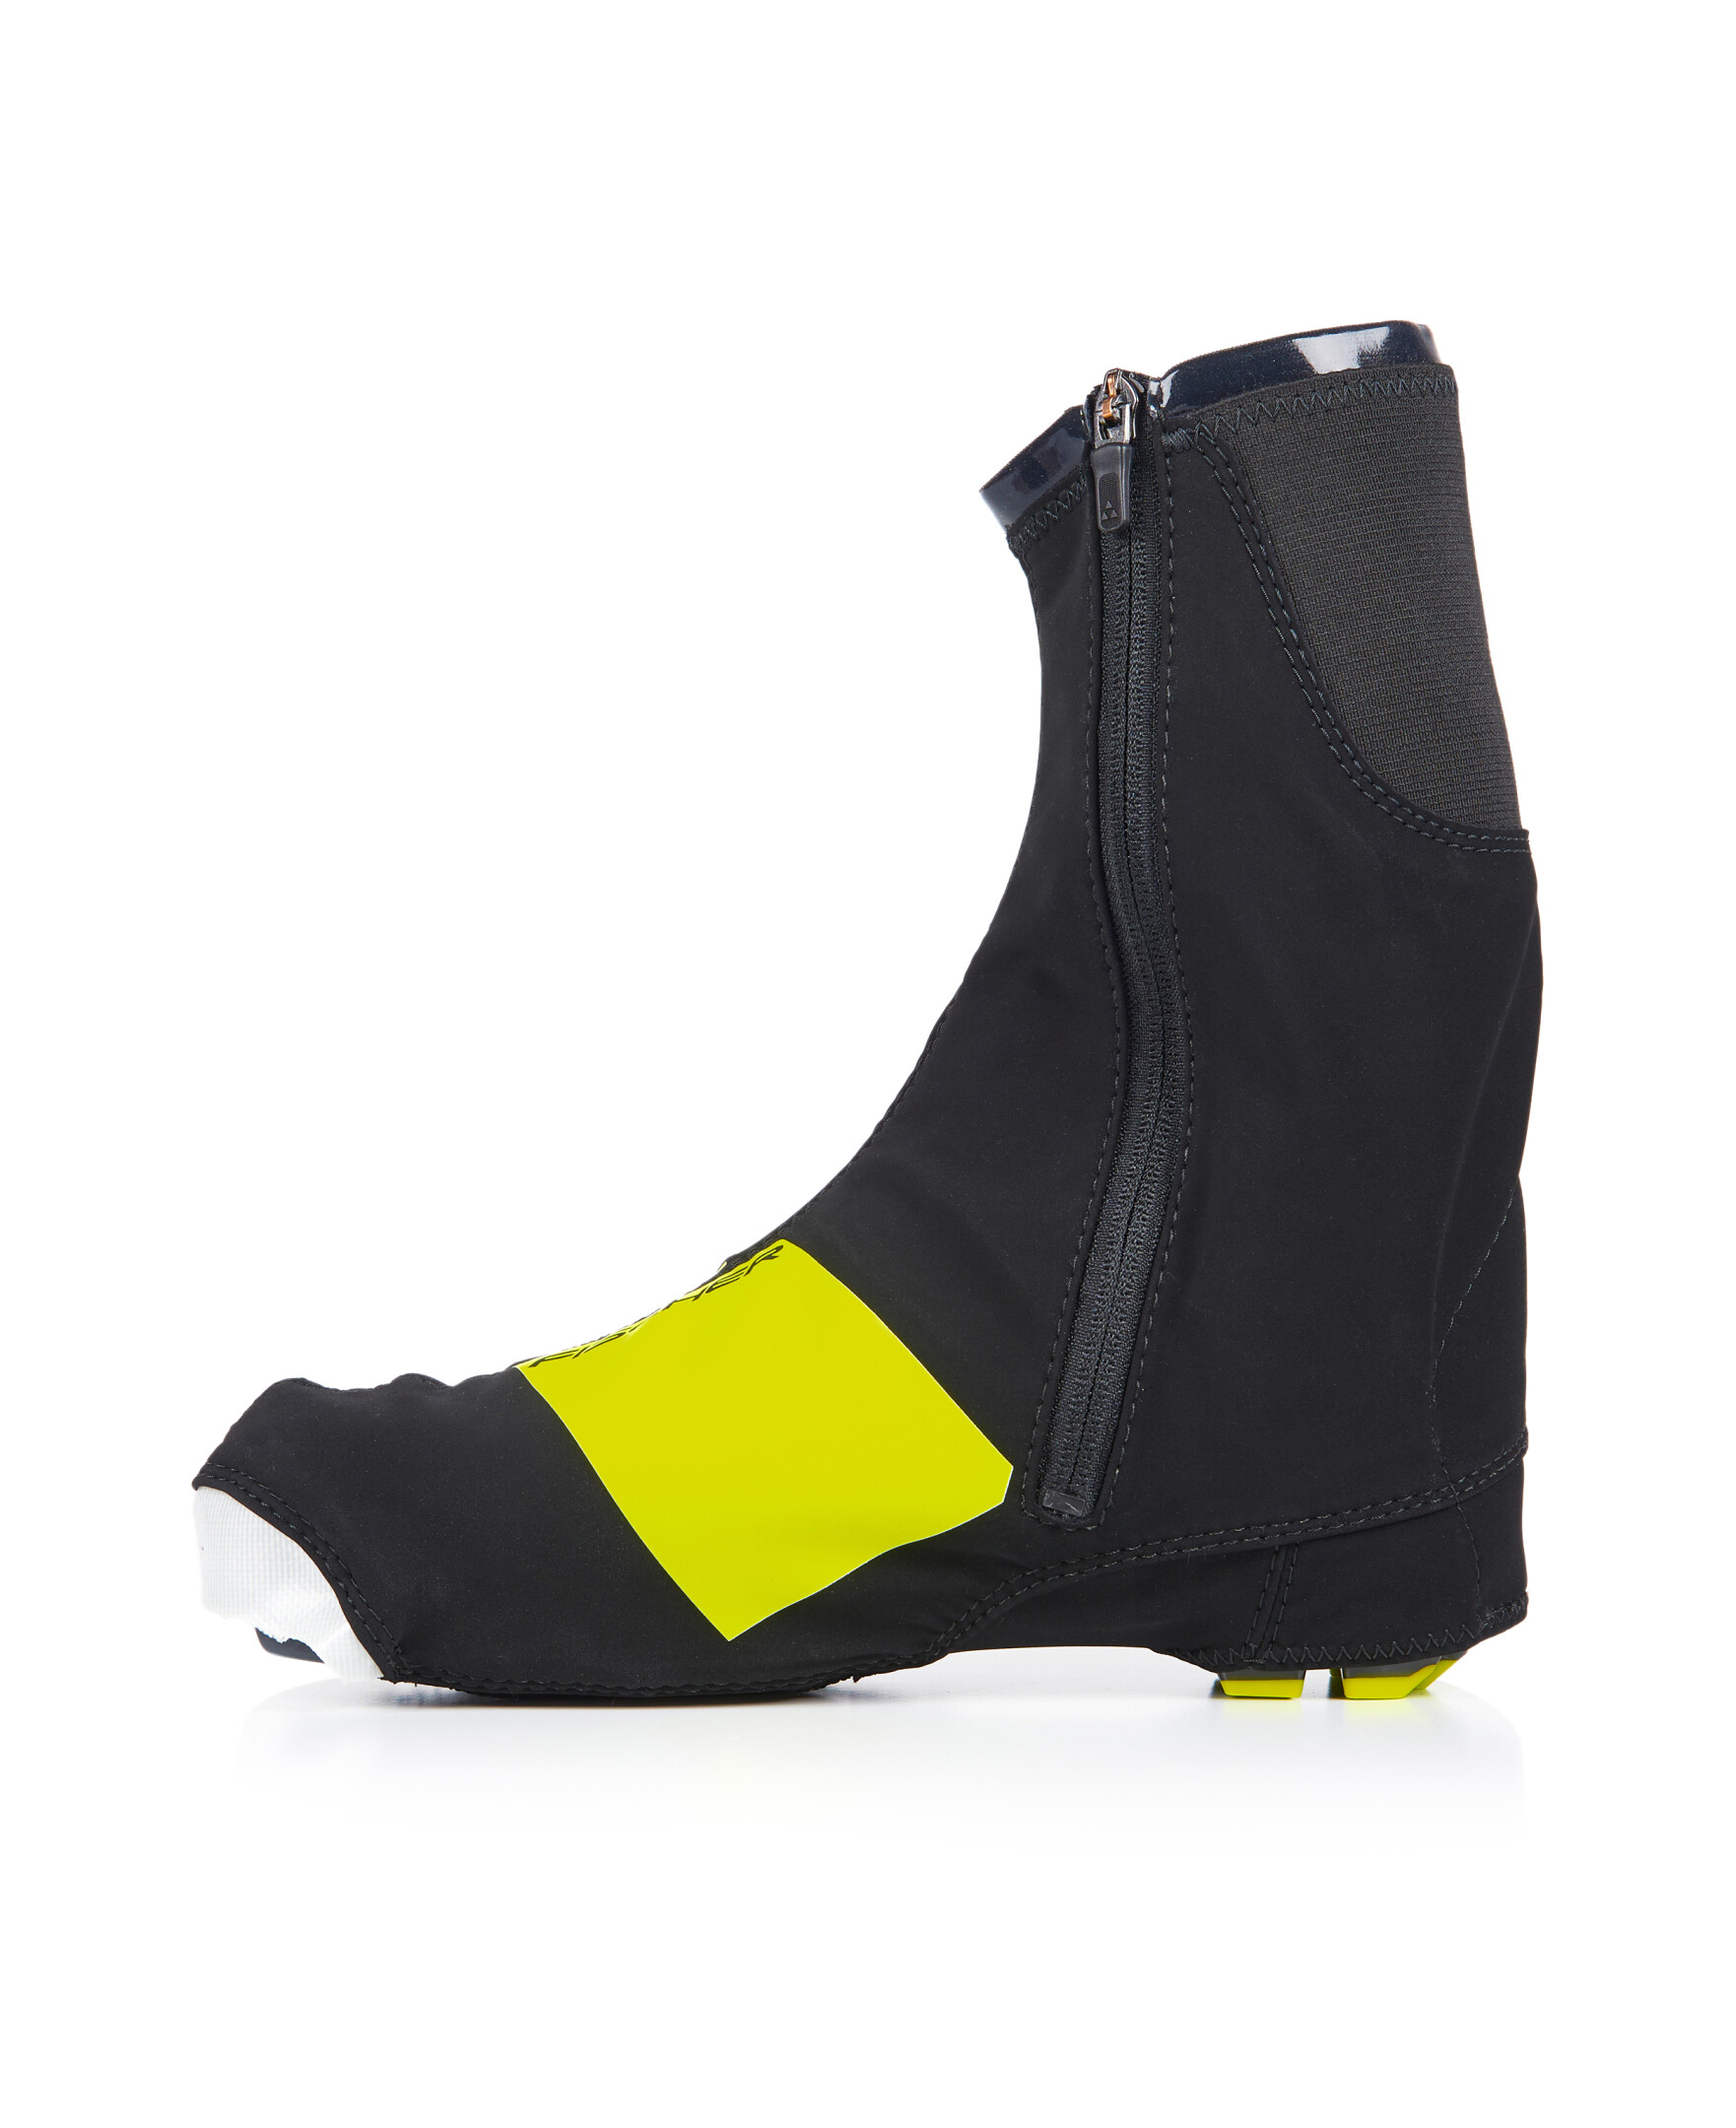 Couvre-bottes Fischer Bootcover Race 2020 - Demers bicyclettes et